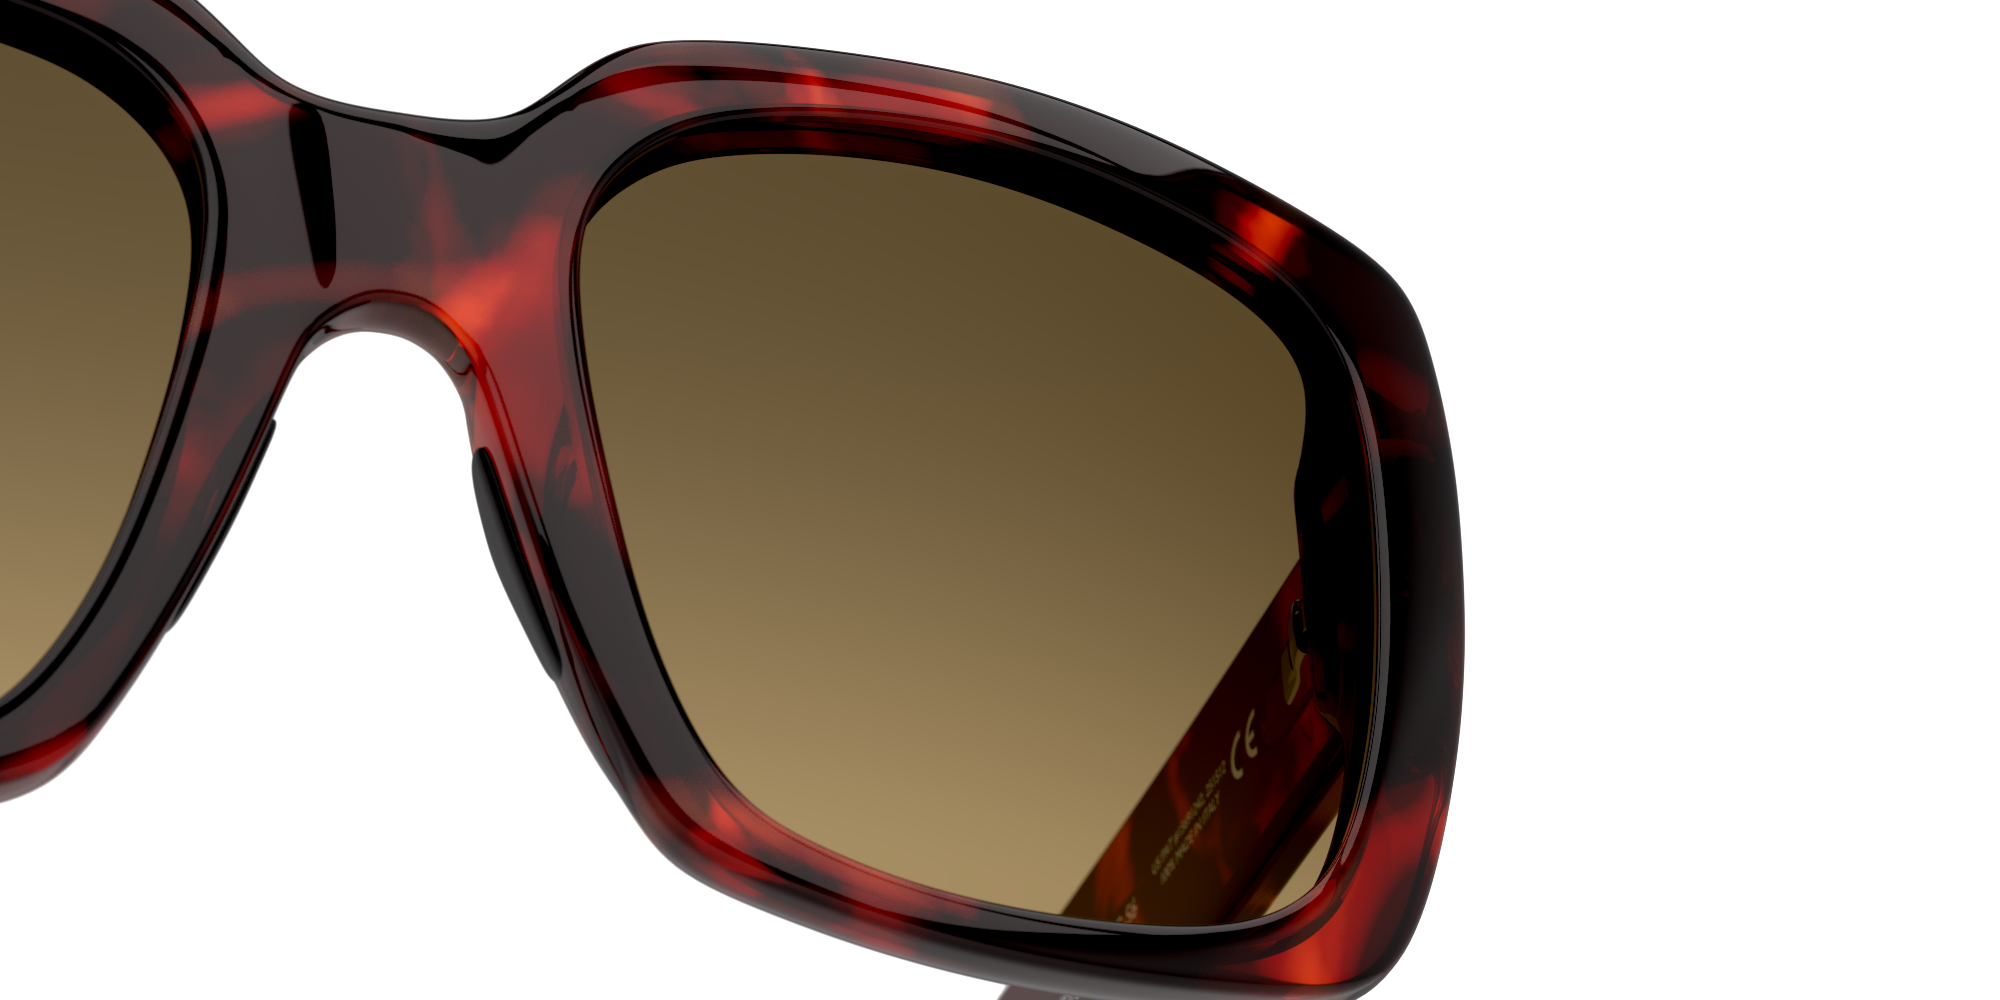 [products.image.detail01] MAUI JIM 863 Two Steps 10